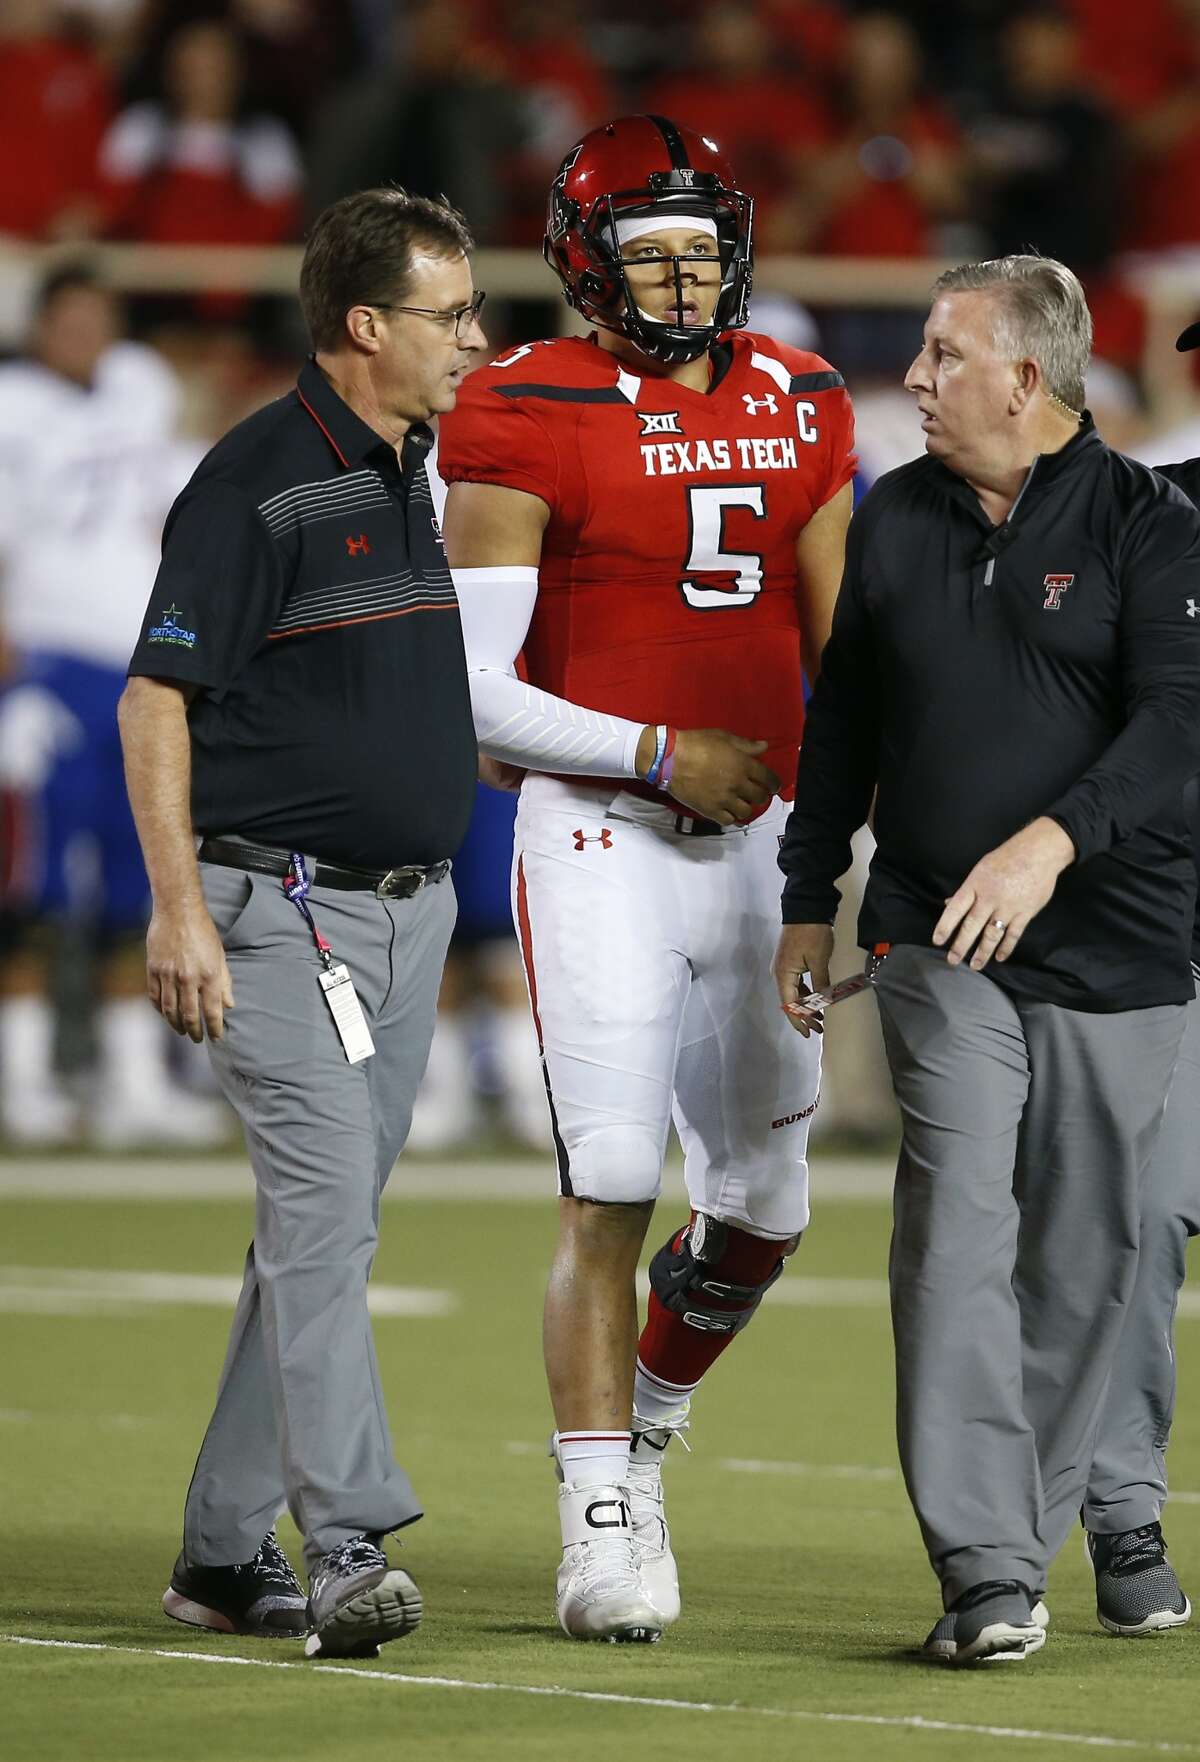 Texas Tech's Patrick Mahomes walks off the field after suffering an injury during an NCAA college football game against Kansas, Thursday, Sept. 29, 2016, in Lubbock, Texas. (Brad Tollefson/Lubbock Avalanche-Journal via AP)